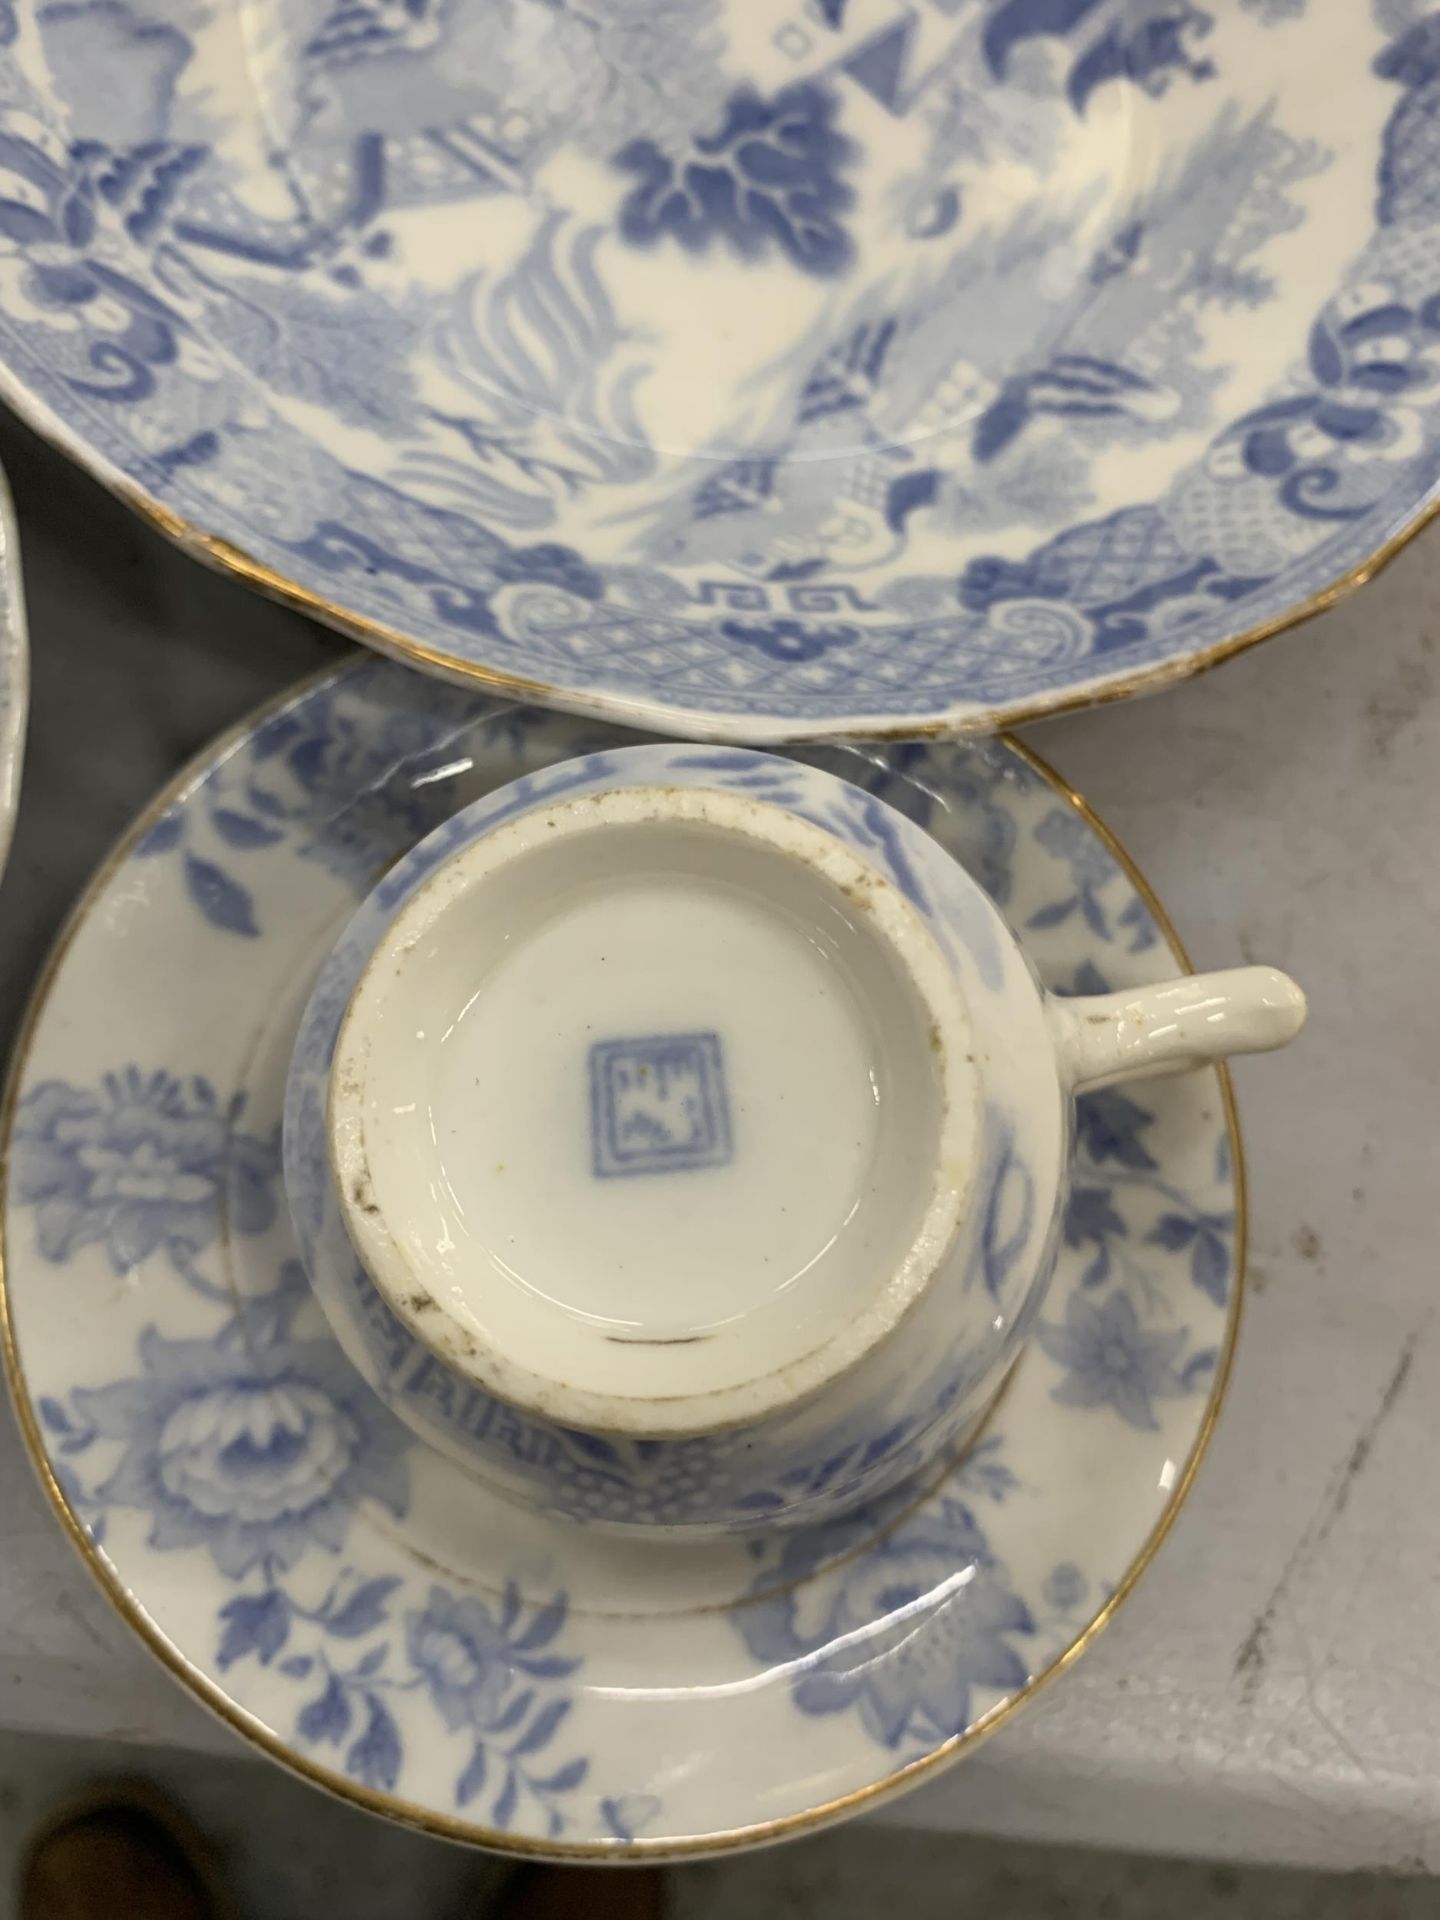 A LARGE COLLECTION OF 19TH CENTURY BLUE AND WHITE TEA WARES, TEAPOT, CUPS, SAUCERS ETC - Image 6 of 6